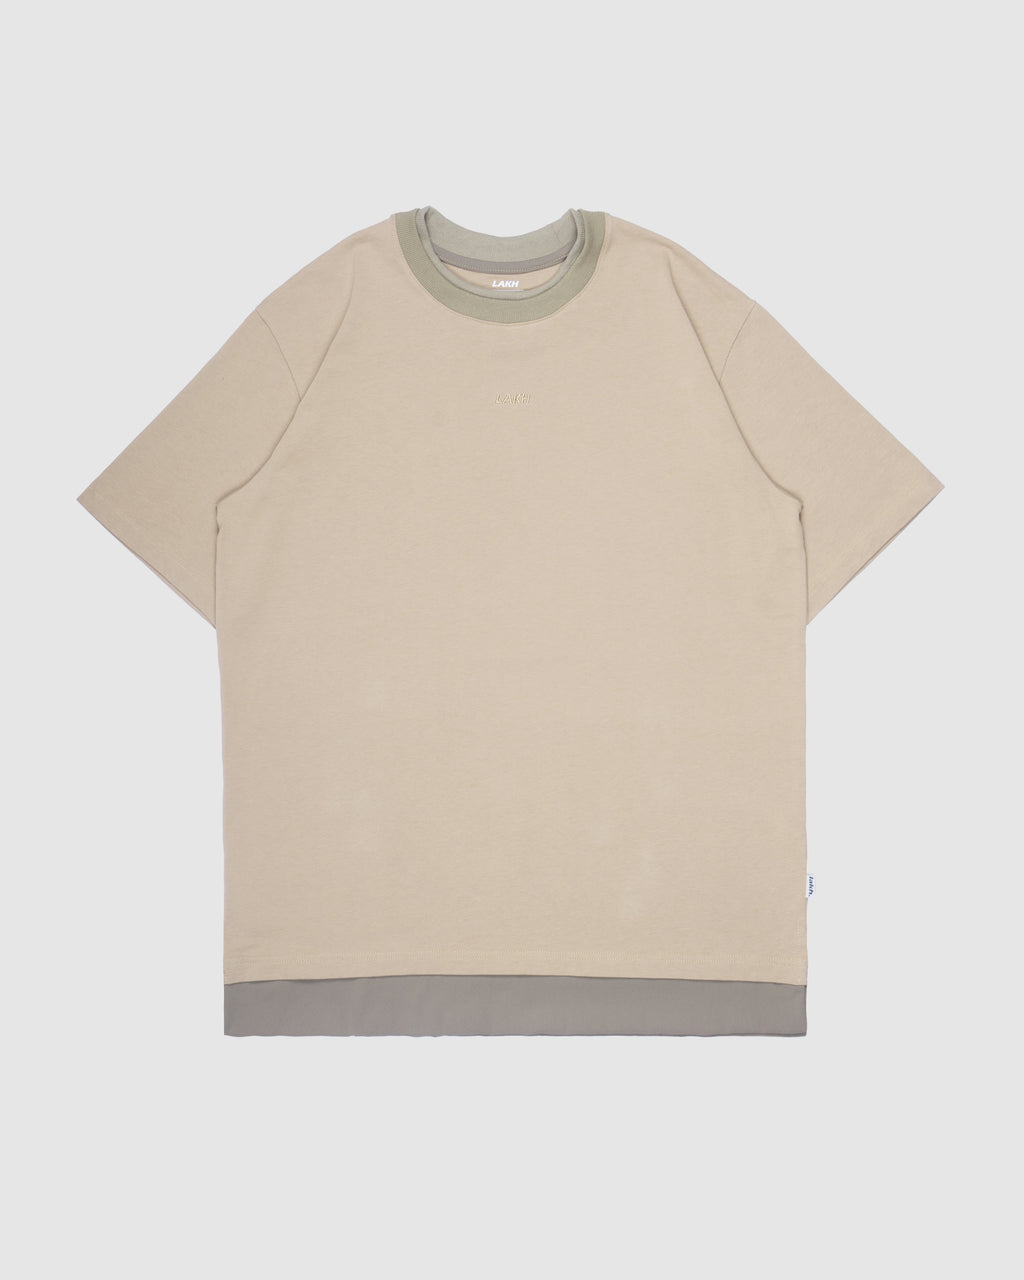 Patch Layer Tee - Sand